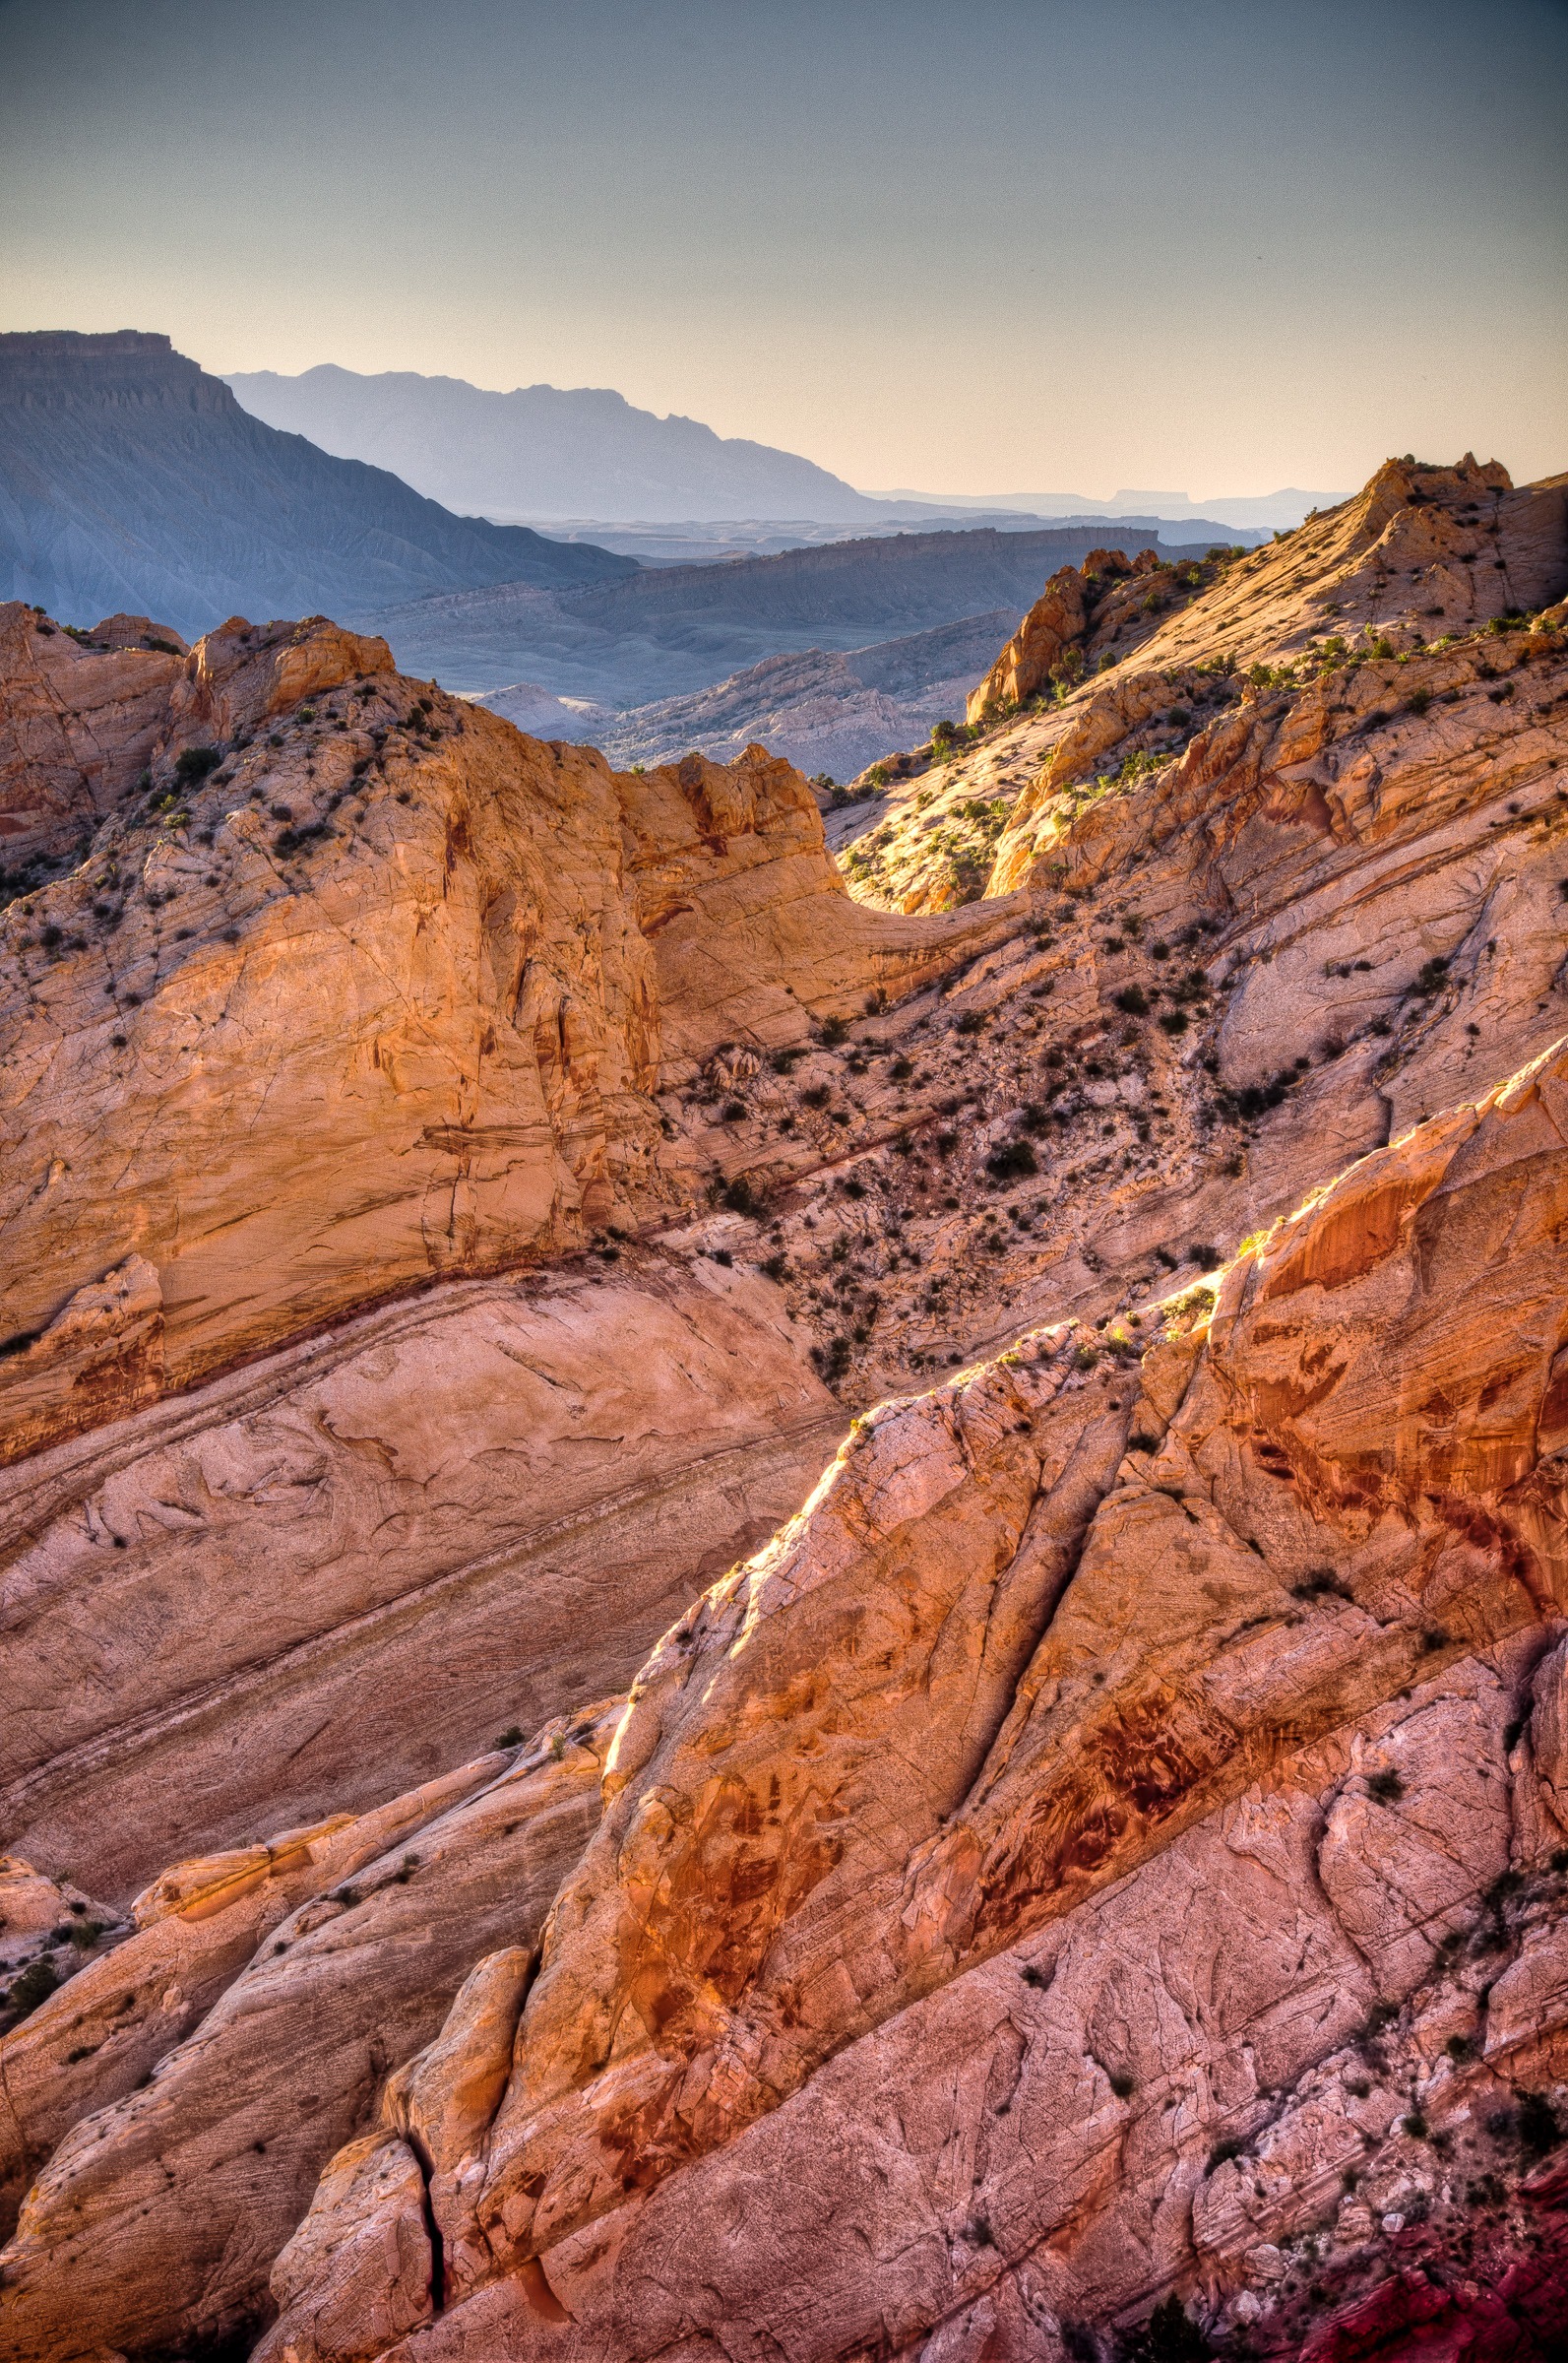 Looking southeast through uptilted layers of the Waterpocket Fold along Burr Trail in Capitol Reef National Park, Utah.